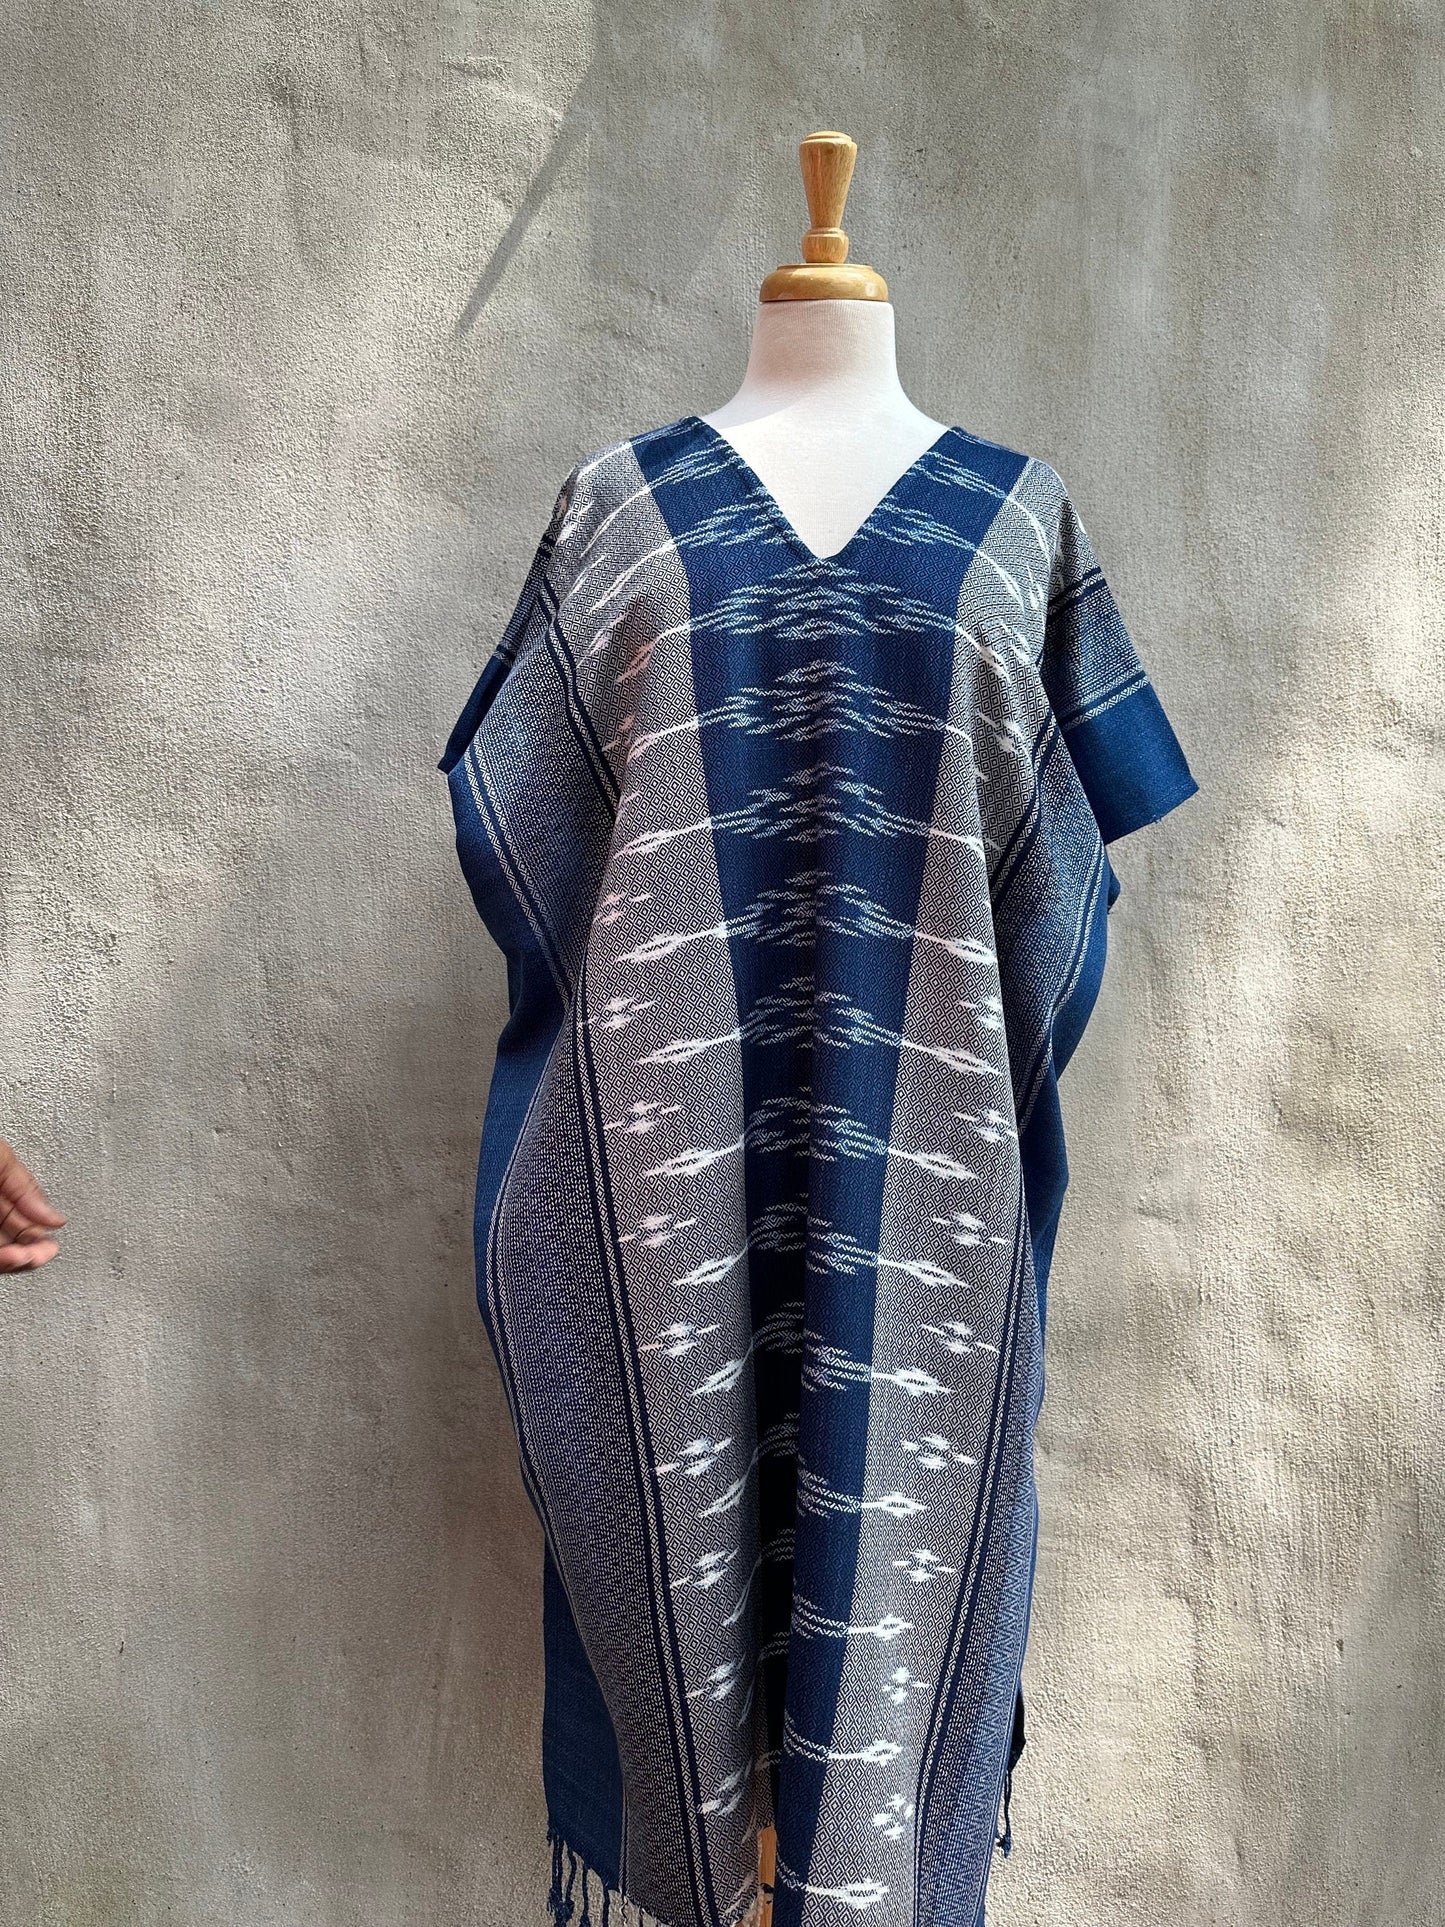 MALA handworks  Ikat Hand Woven Pattern Kaftan in Indigo Blue with Light Gray and White